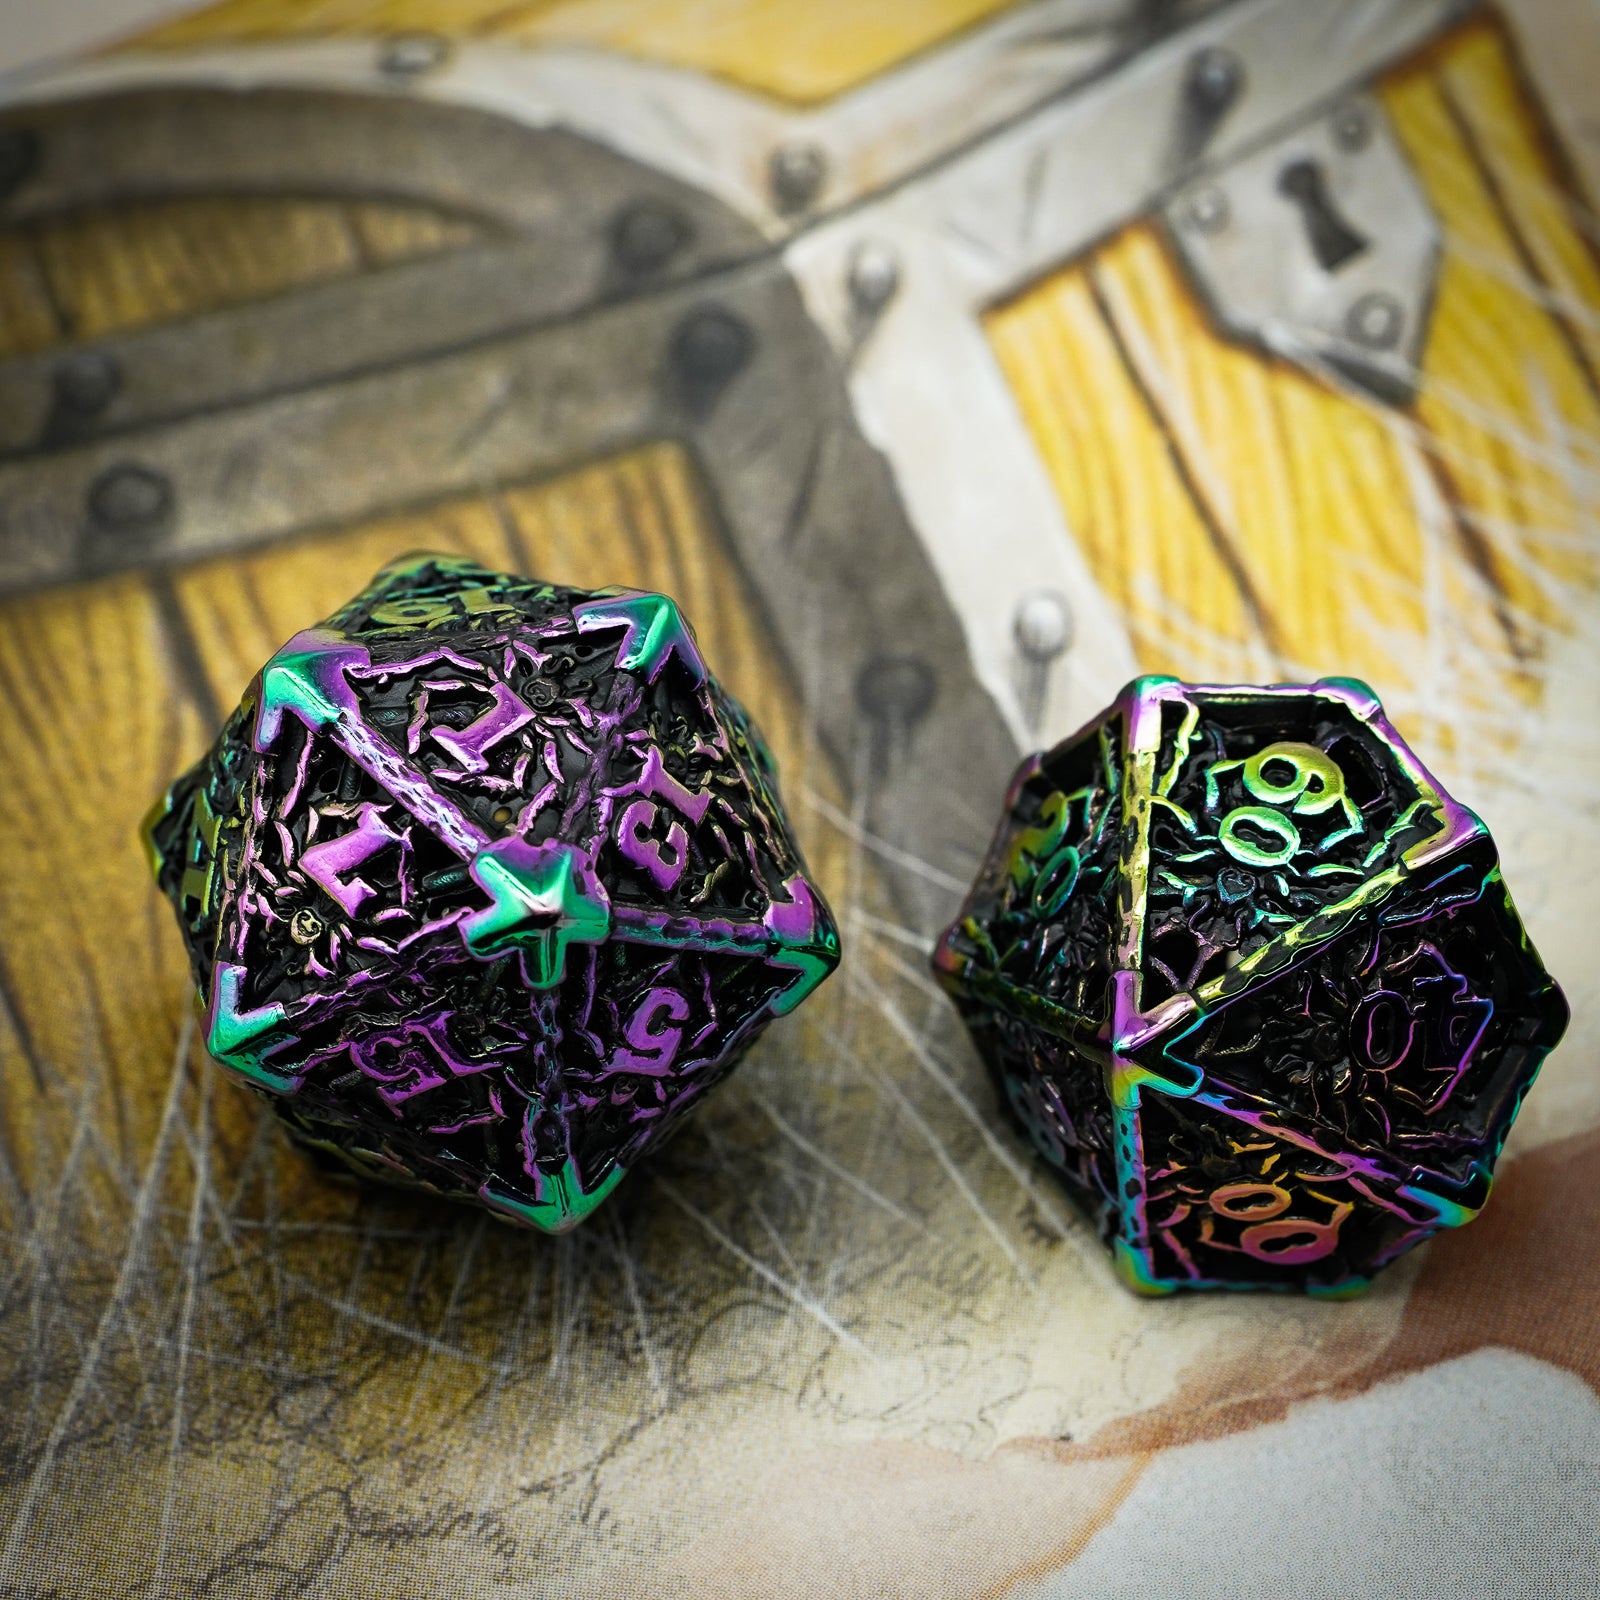 d20 and percentage dice highlight